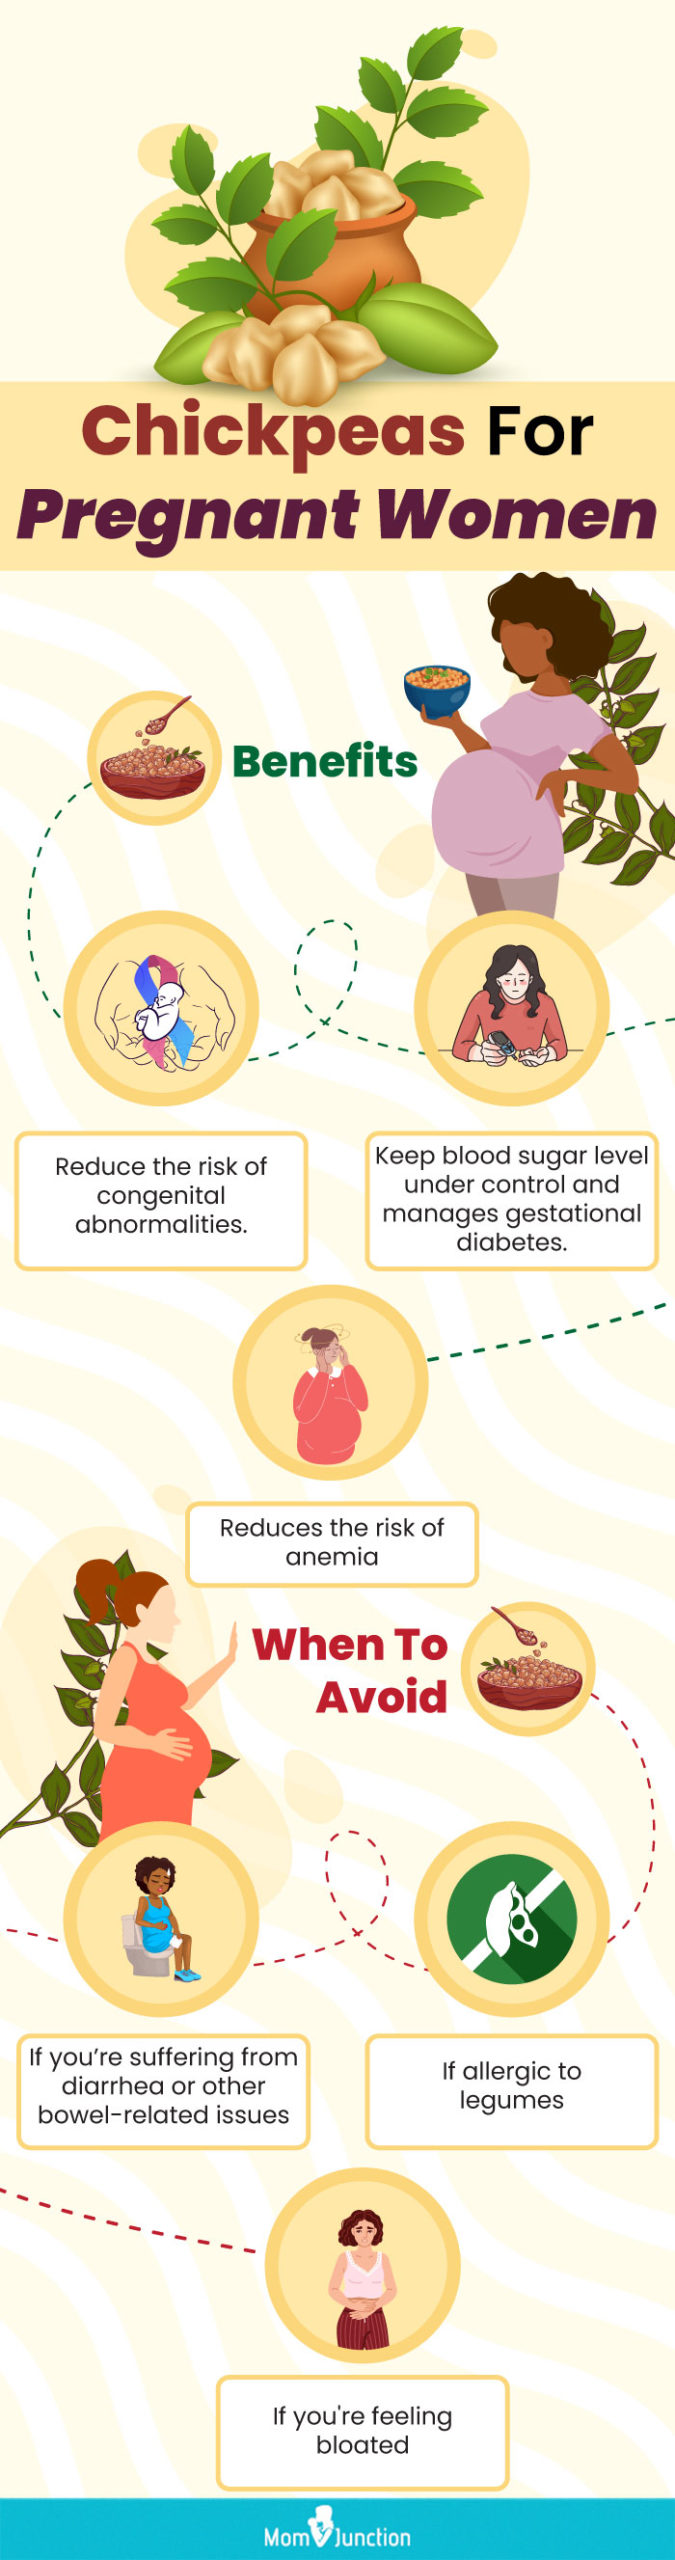 chickpeas for pregnant women (infographic)